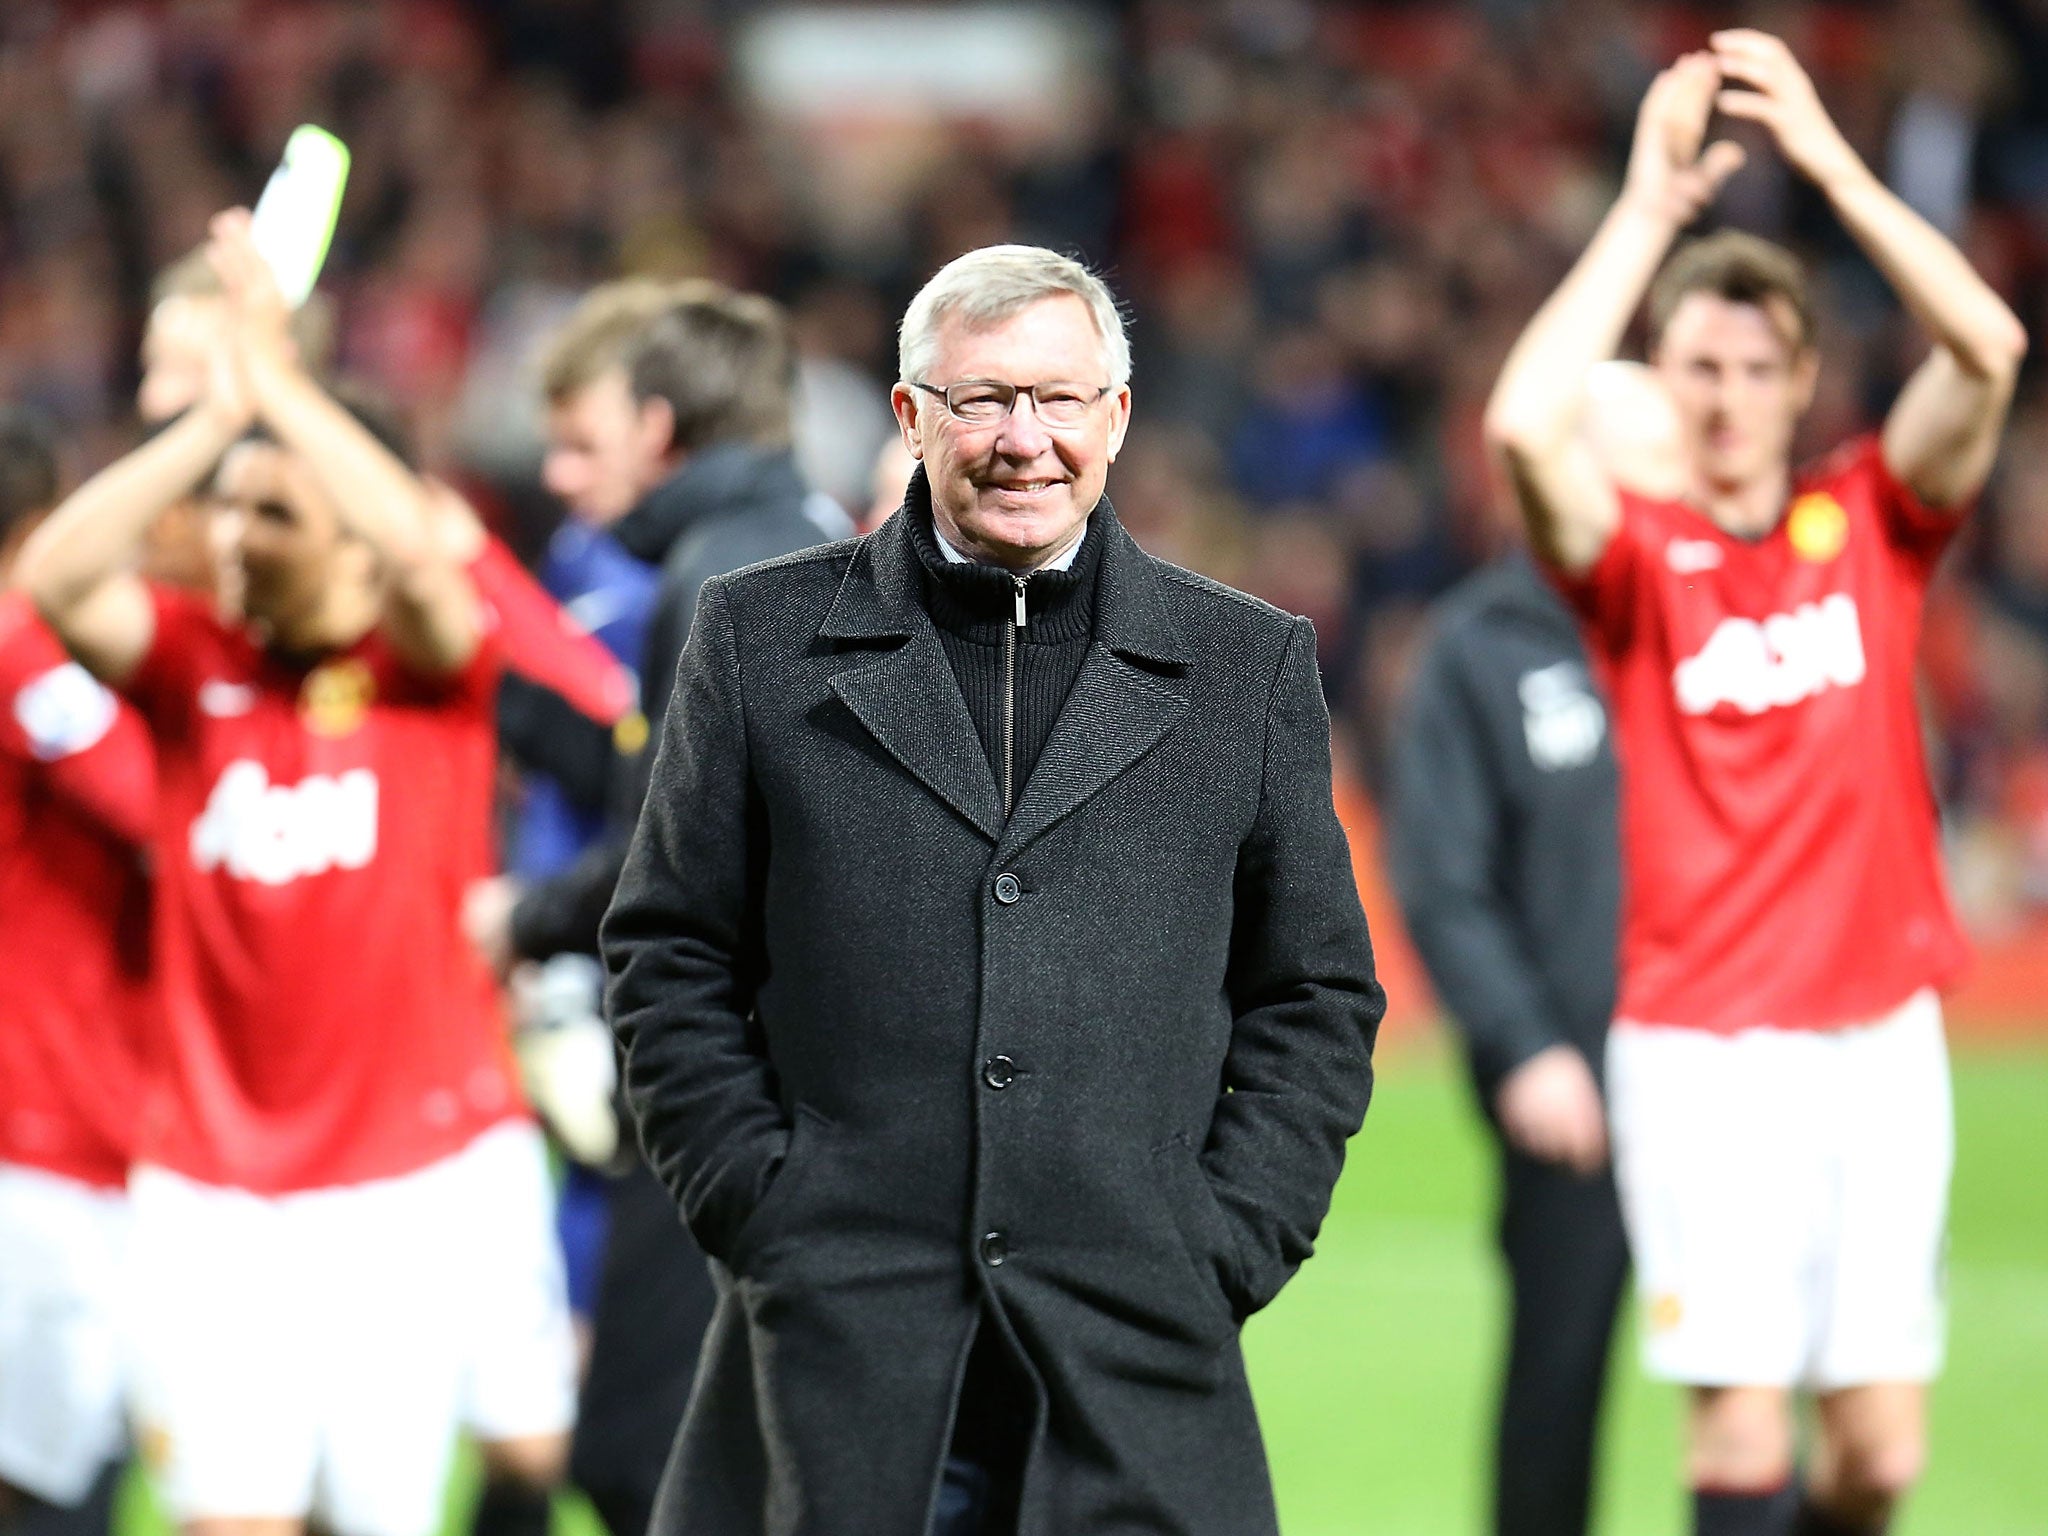 Manager Sir Alex Ferguson of Manchester United celebrates at final whistle of the Barclays Premier League match between Manchester United and Aston Villa at Old Trafford on April 22, 2013 in Manchester, England.